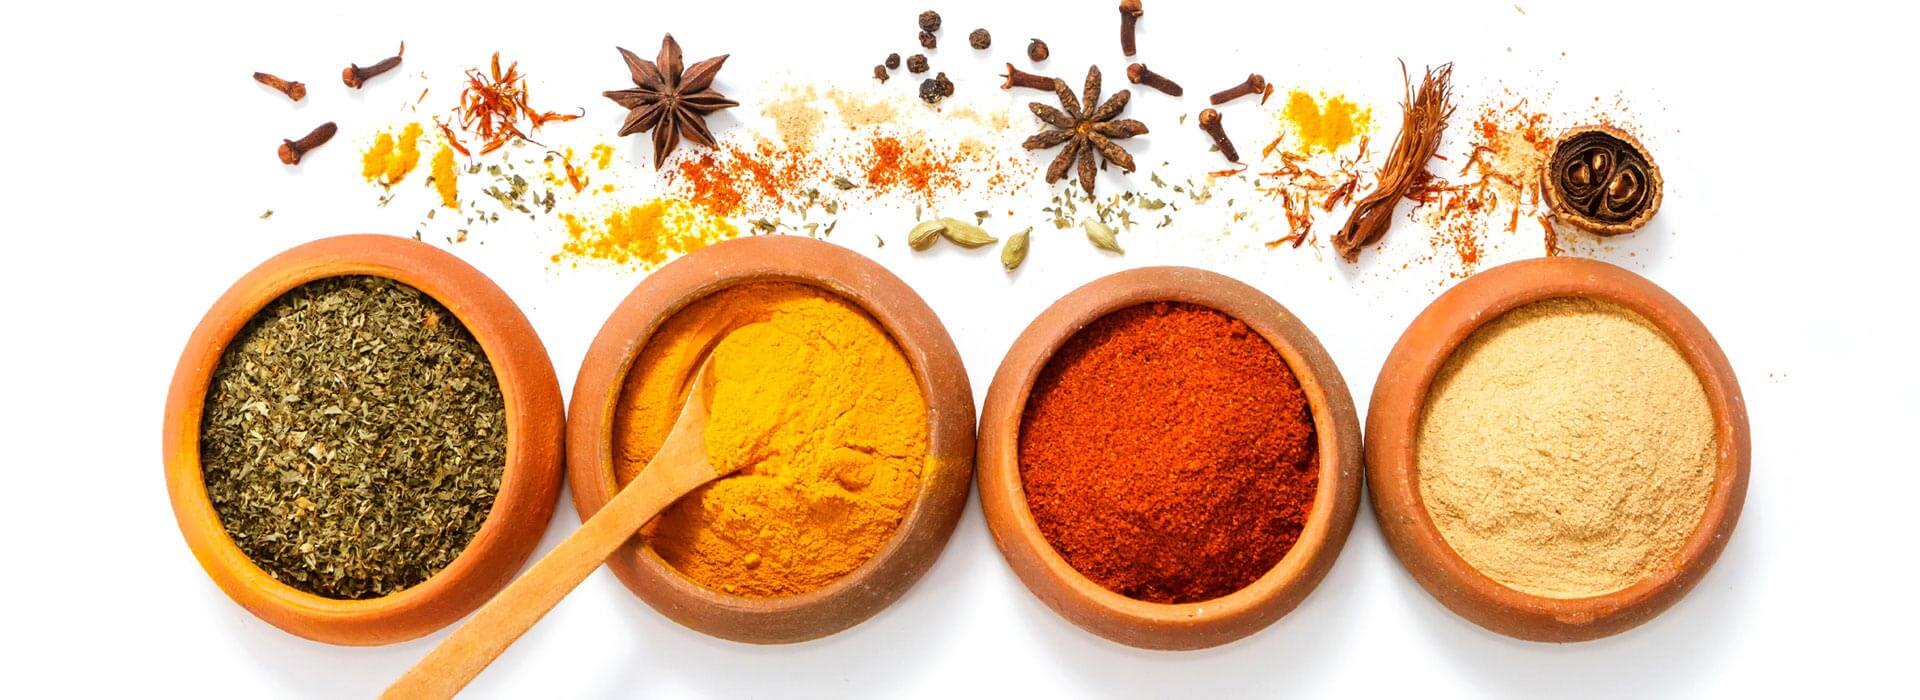 Crafted with Care: Our spices capture the essence of Indian culture and heritage